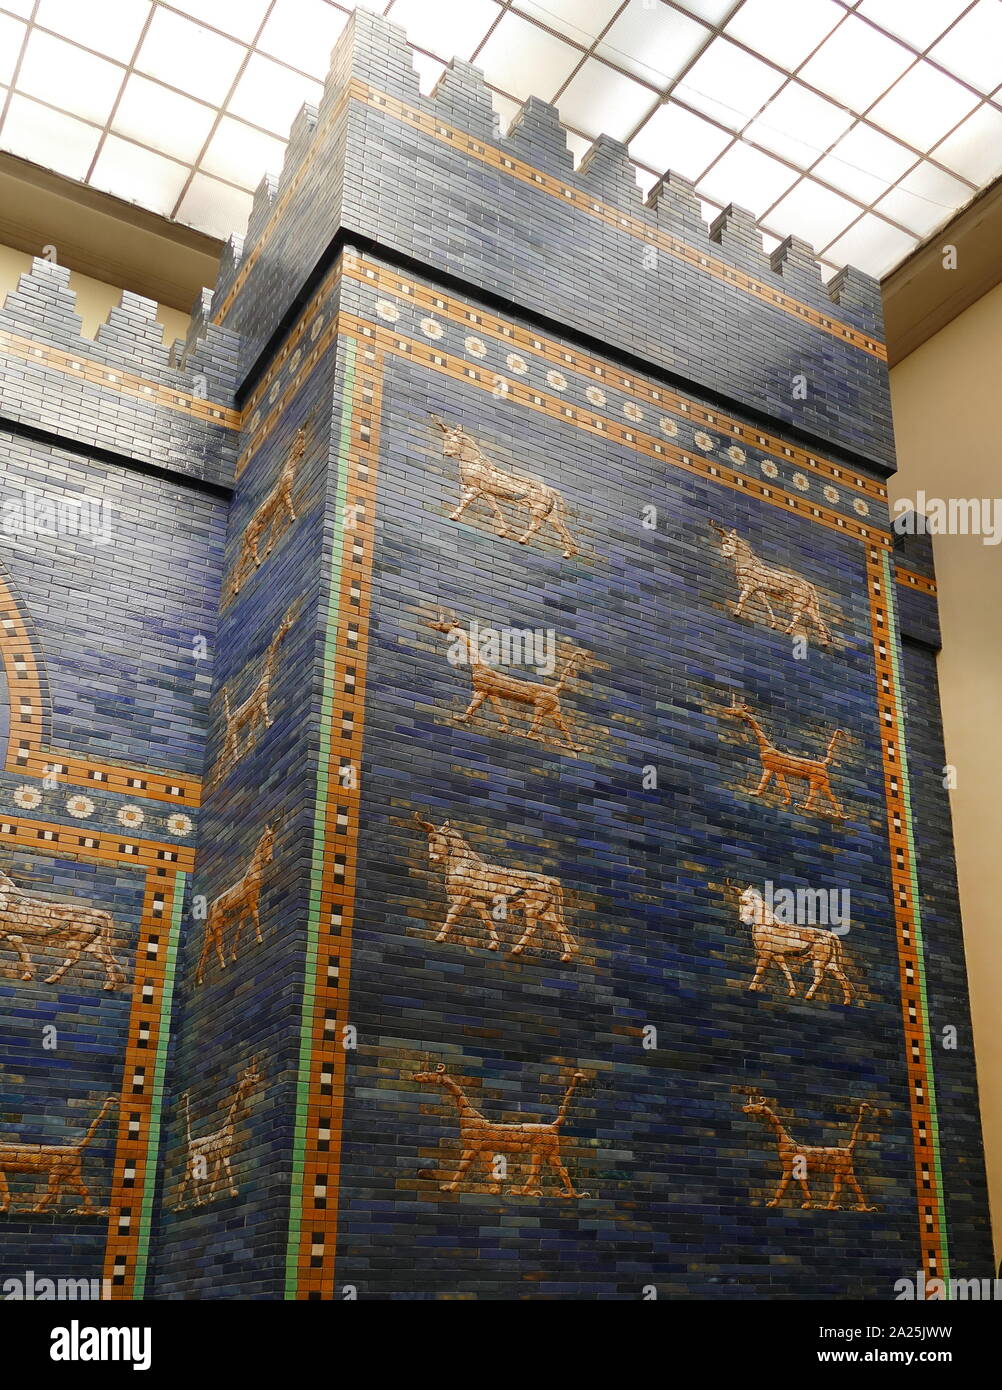 The Ishtar Gate of Babylon. constructed in about 575 BC, by order of King Nebuchadnezzar II on the north side of the city. It was part of a grand walled processional way leading into the city. The walls were finished in glazed bricks mostly in blue, with animals and deities in low relief at intervals, these also made up of bricks that are moulded and colored differently. It was excavated in the early 20th century, and a reconstruction using original bricks, completed in 1930, is now shown in Berlin’s Pergamon Museum. Stock Photo